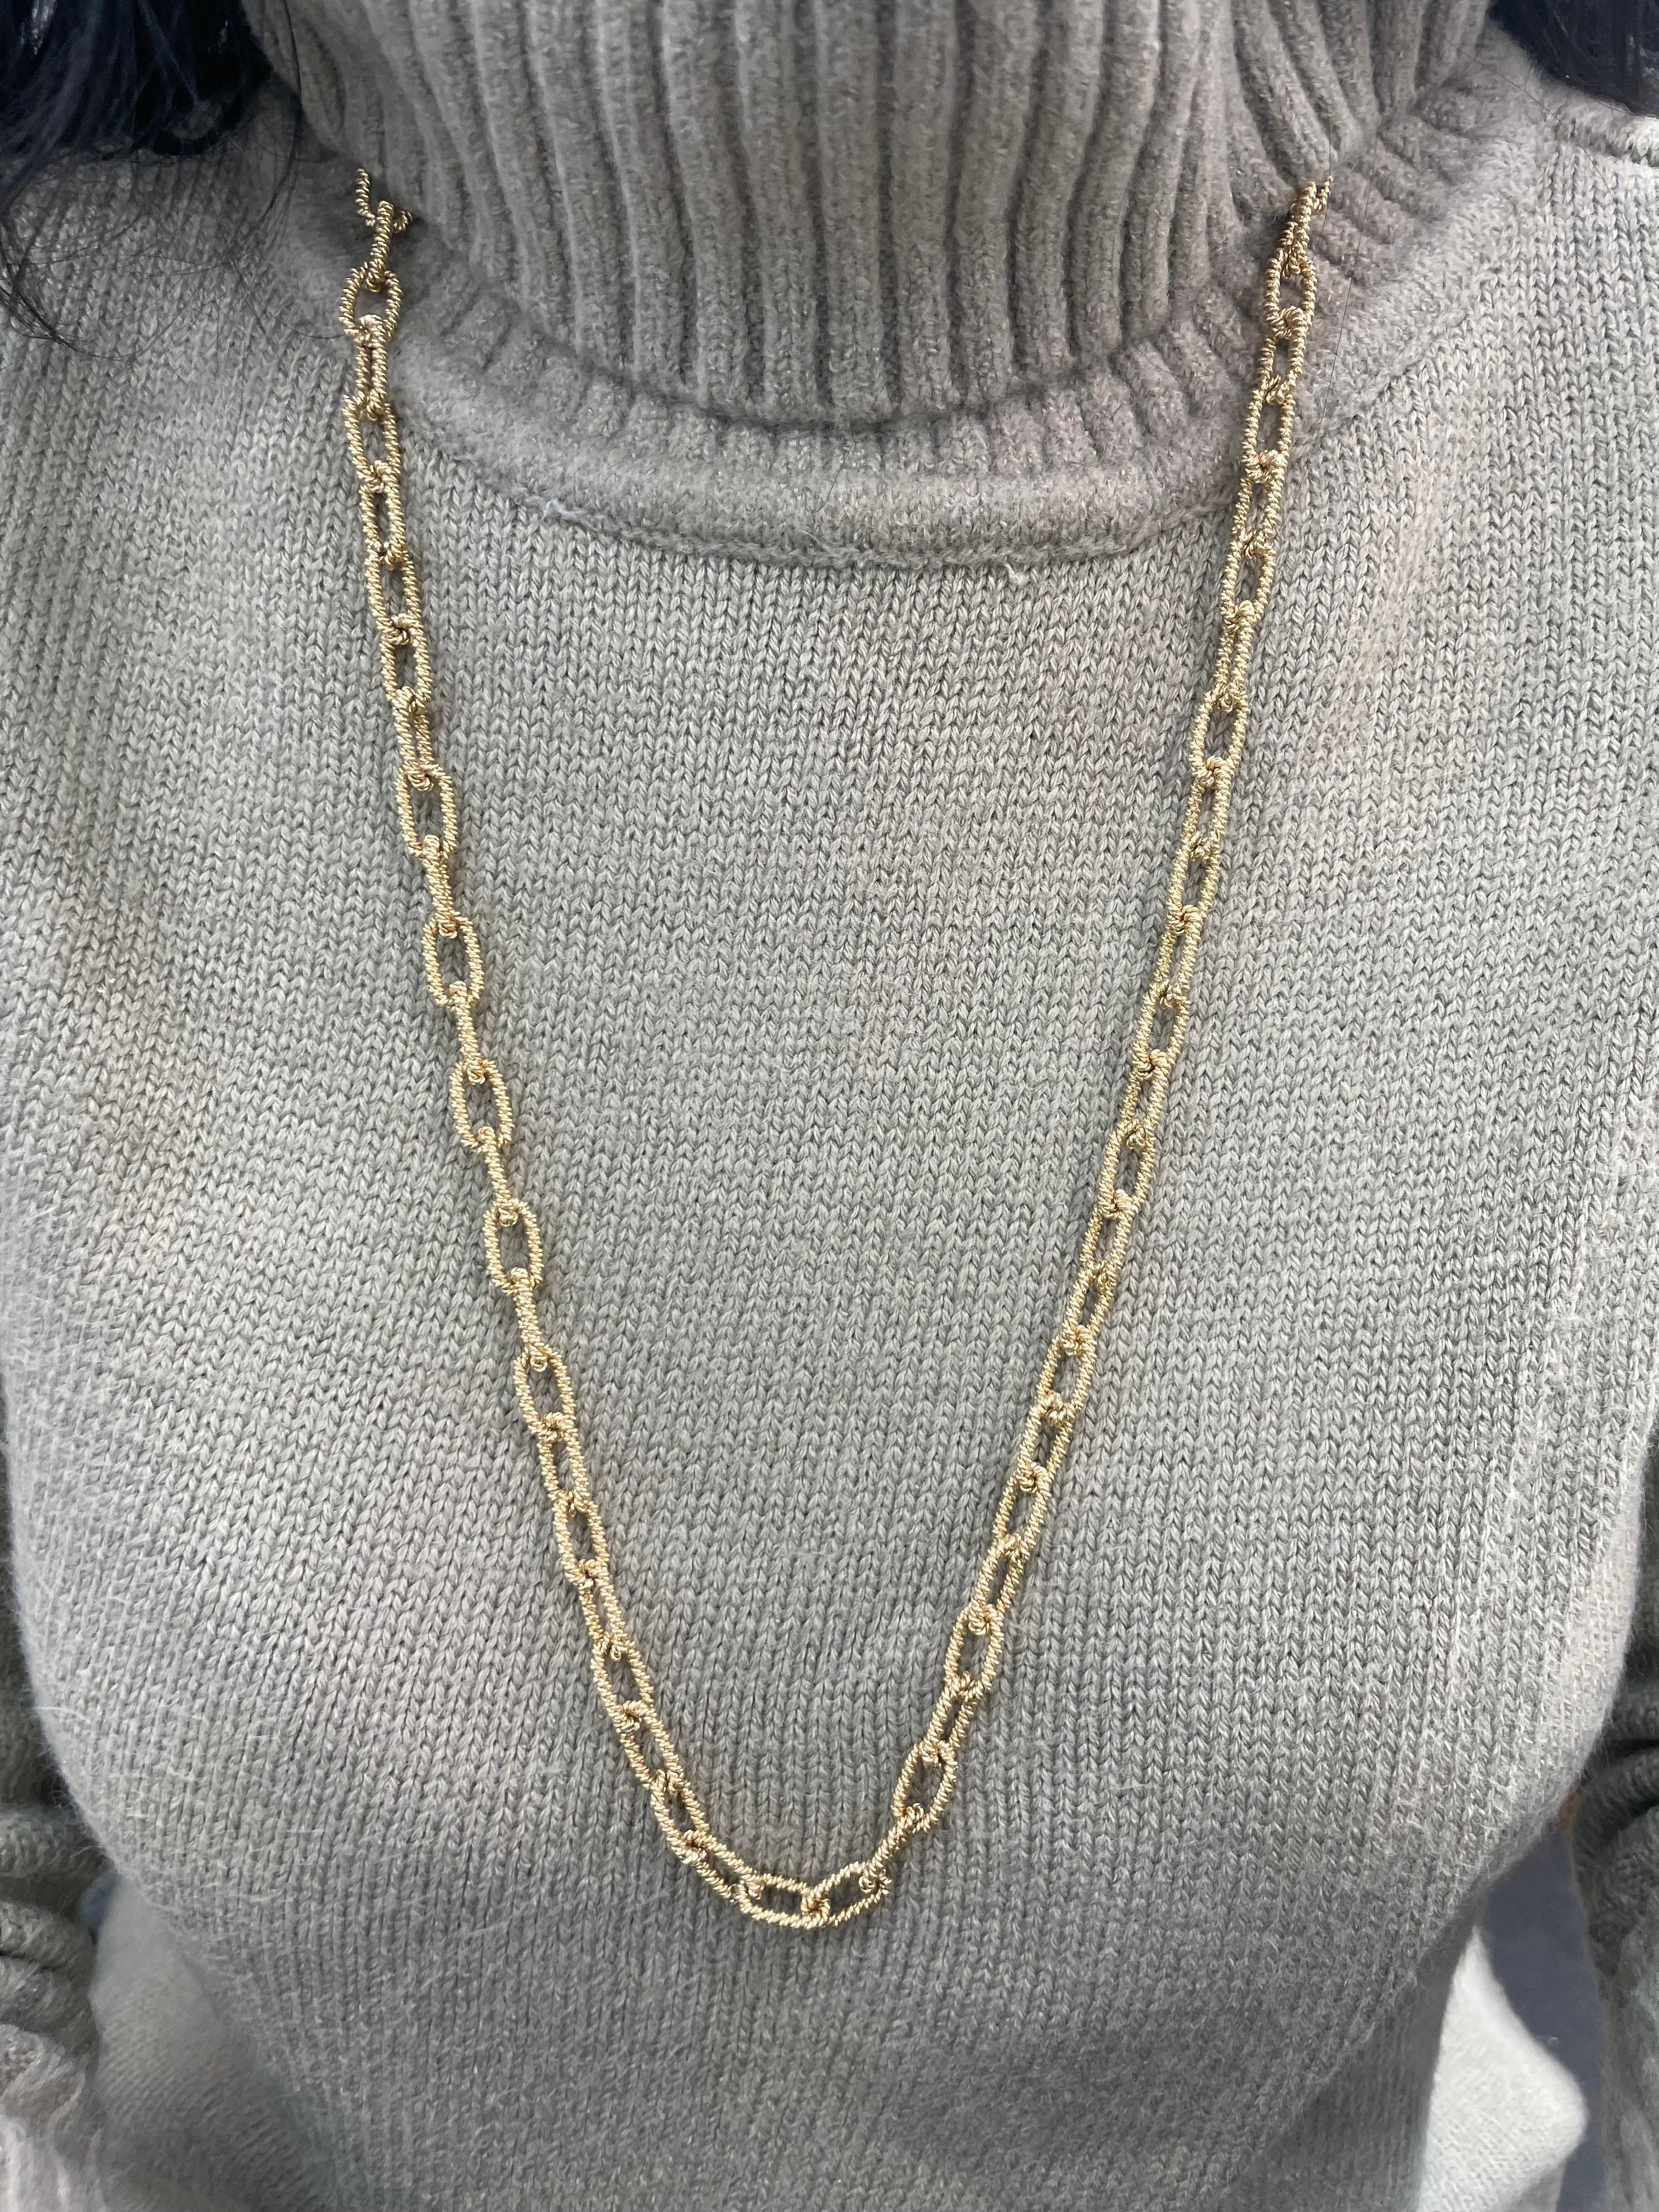 14 Karat Yellow Gold Heavy Rope Link Chain Necklace 84.5 Grams For Sale 6